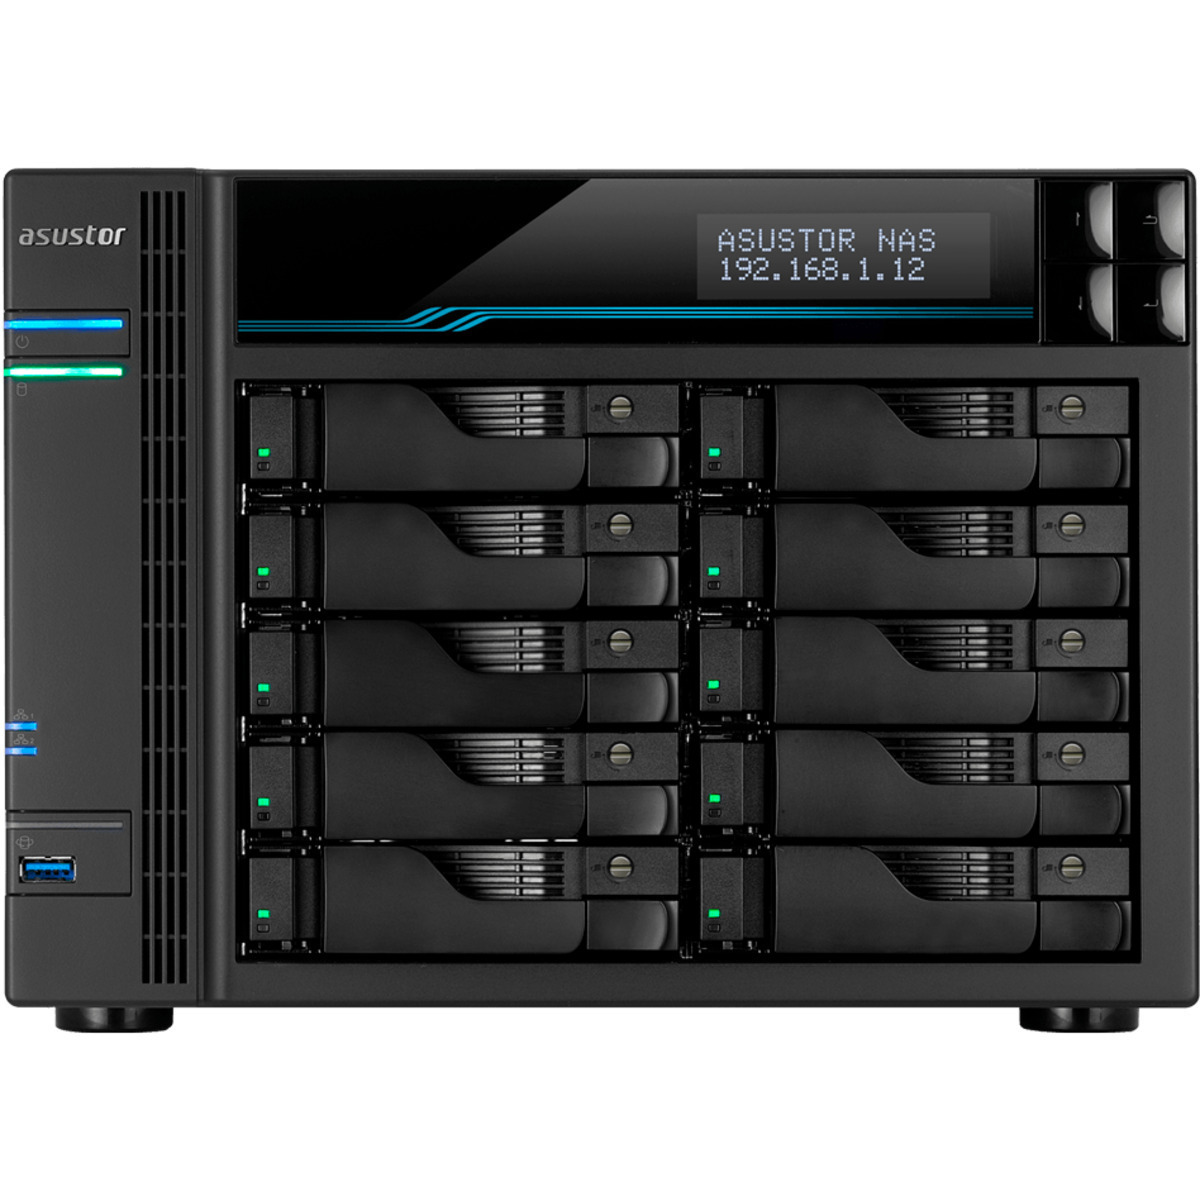 buy $4453 ASUSTOR AS7110T Lockerstor 10 Pro 60tb Desktop NAS - Network Attached Storage Device 10x6000gb Western Digital Blue WD60EZAZ 3.5 5400rpm SATA 6Gb/s HDD CONSUMER Class Drives Installed - Burn-In Tested - nas headquarters buy network attached storage server device das new raid-5 free shipping usa christmas new year holiday sale AS7110T Lockerstor 10 Pro